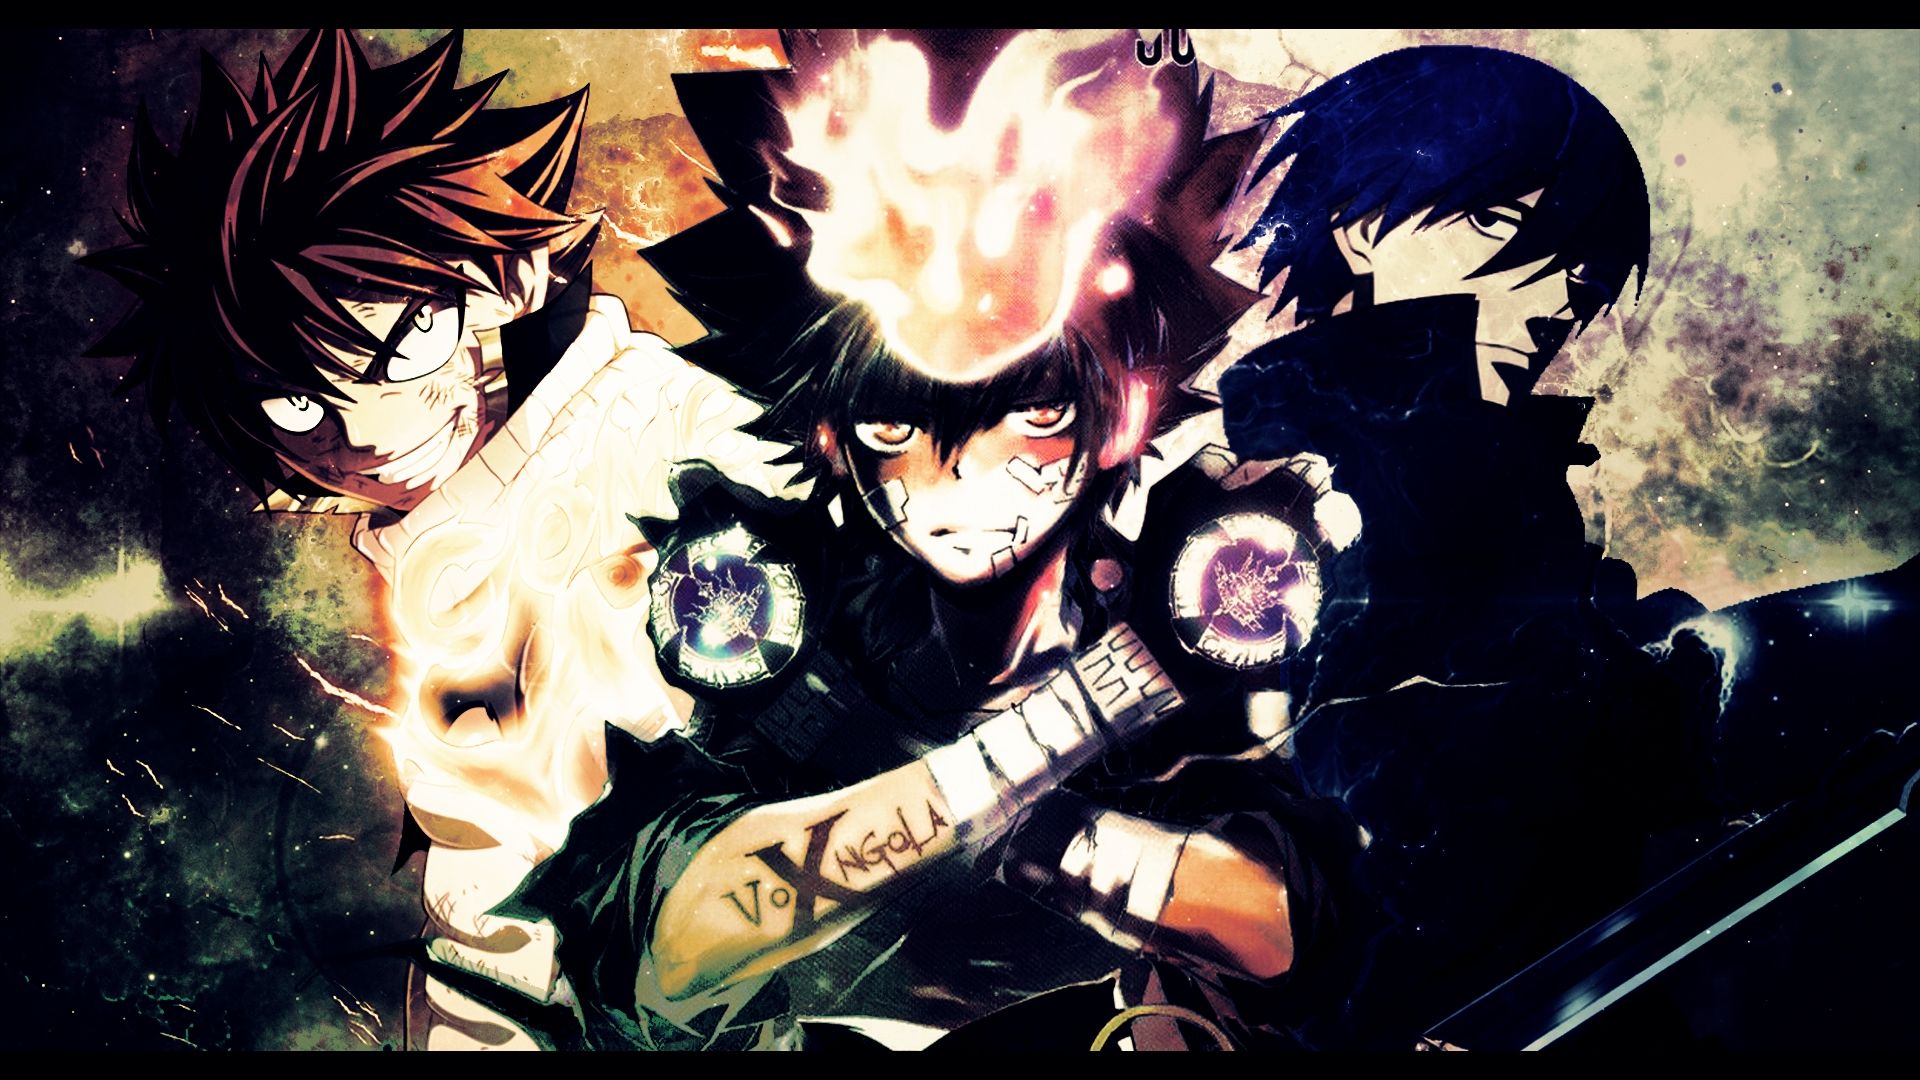 Anime Hero Cool Pic Wallpapers - Wallpaper Cave